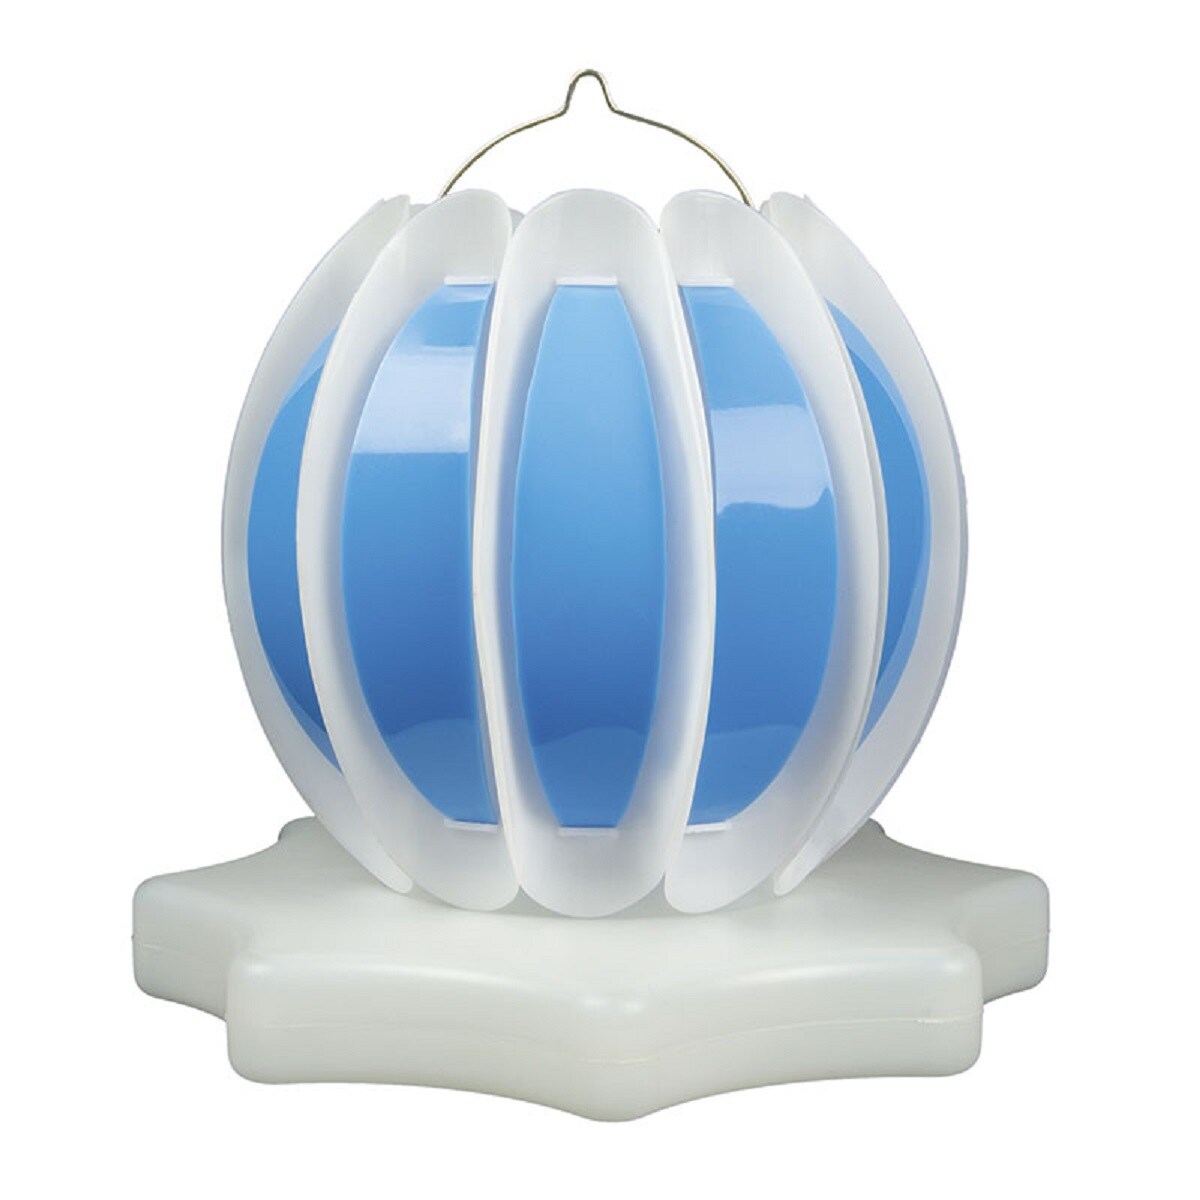 Pool Central Set of 2 Blue and White Floating or Hanging Solar Powered Outdoor Decorative Lanterns